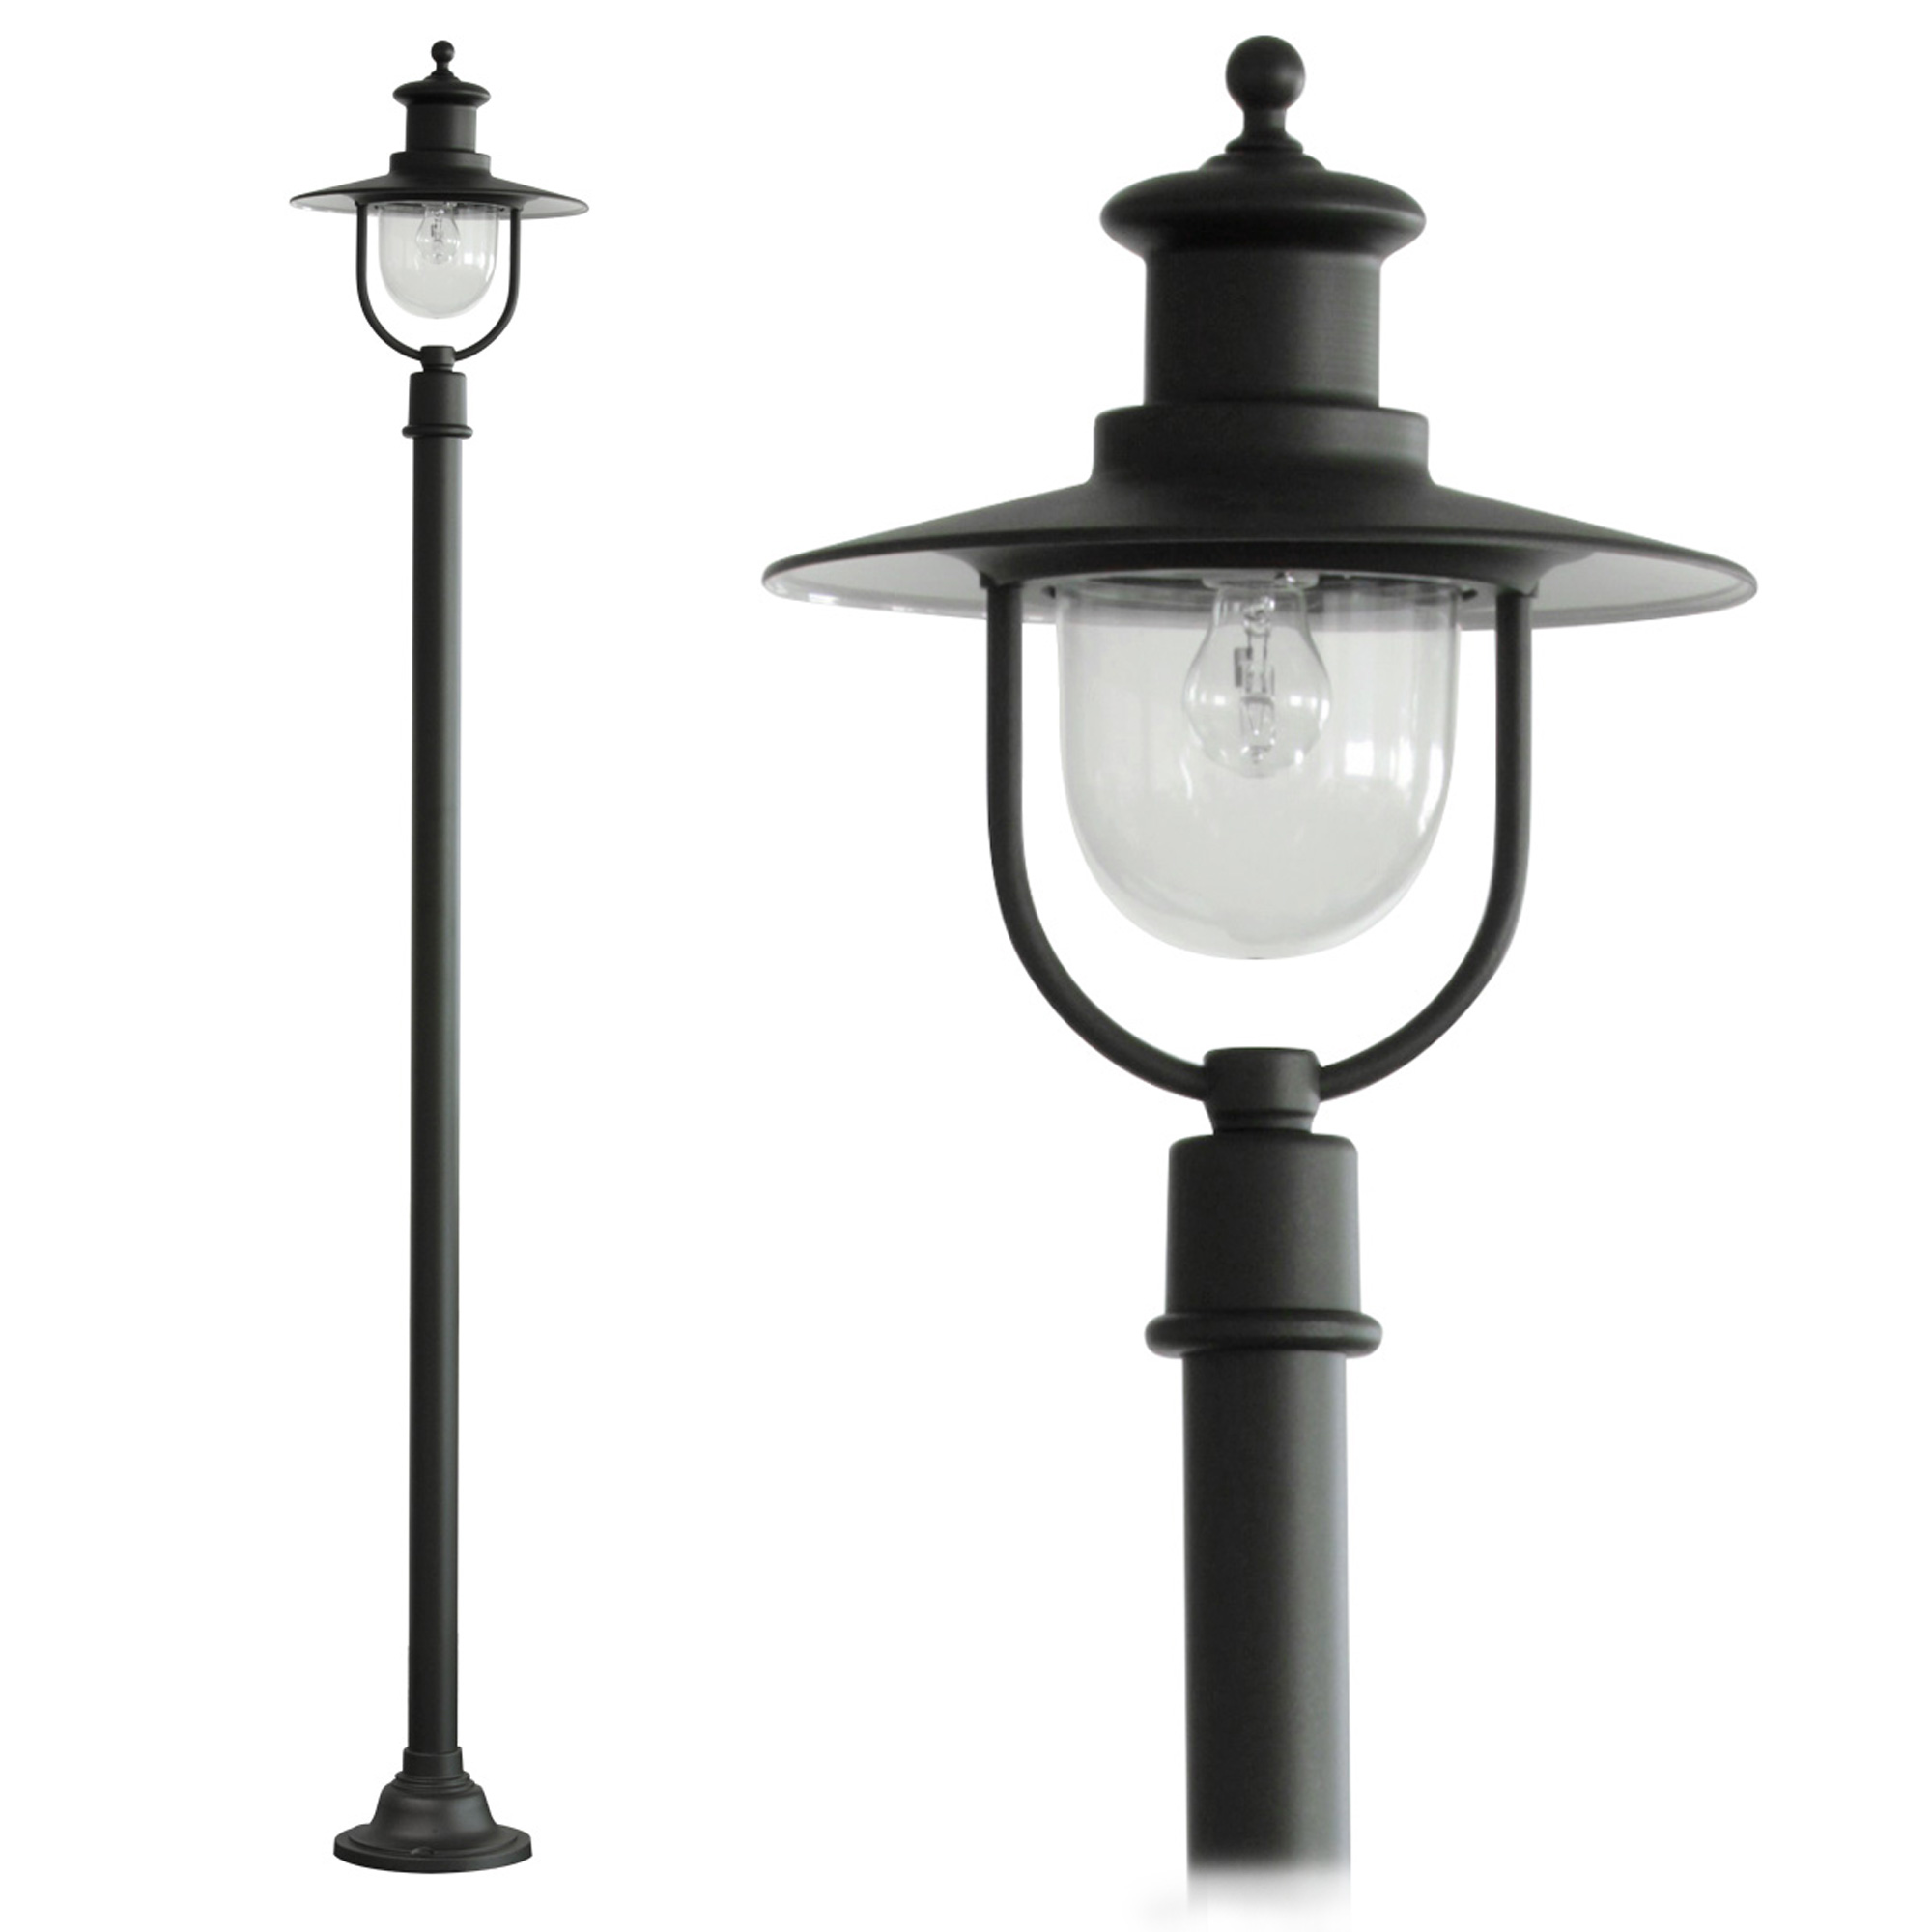 Industrial-style Lamp Post with Simple Pole